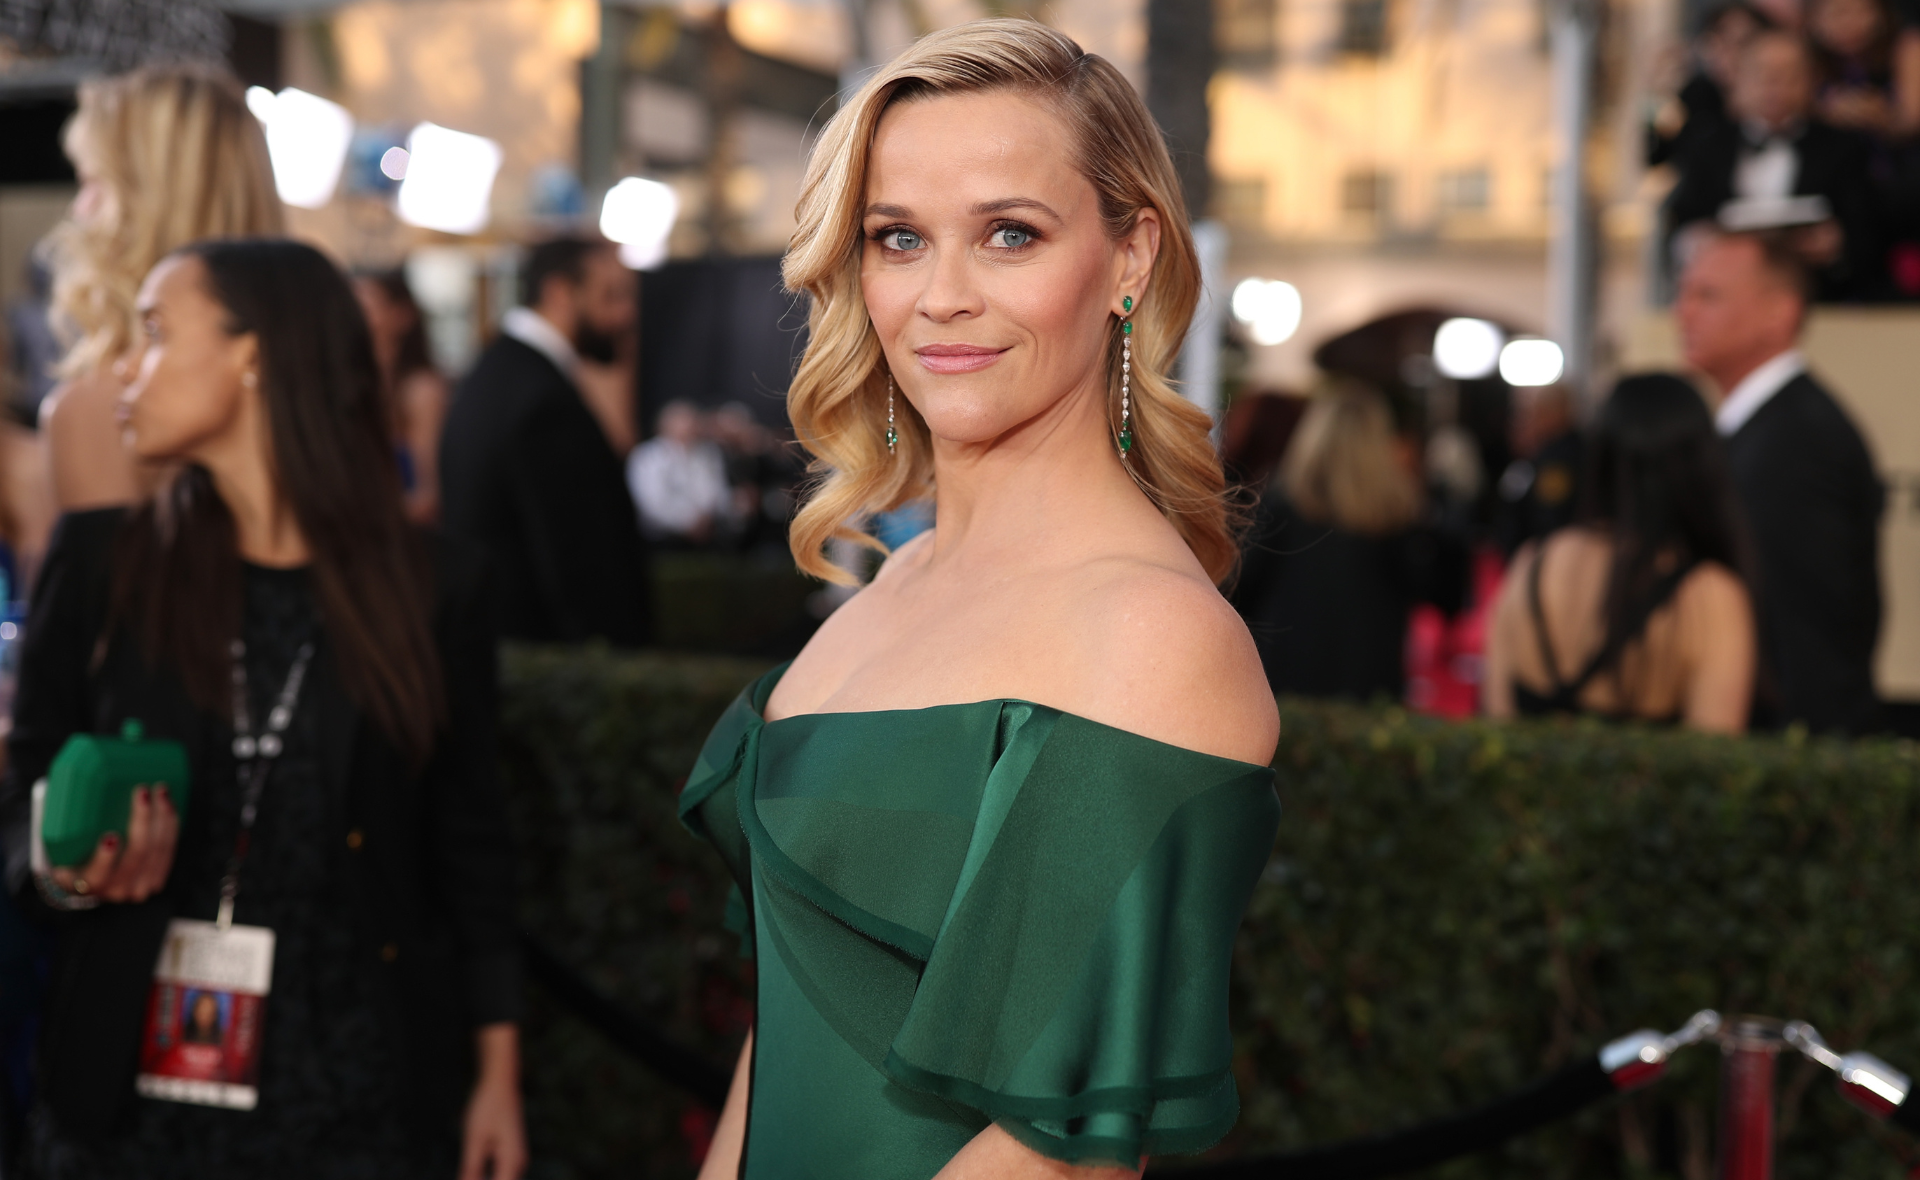 Reese Witherspoon opens up about divorce from Jim Toth